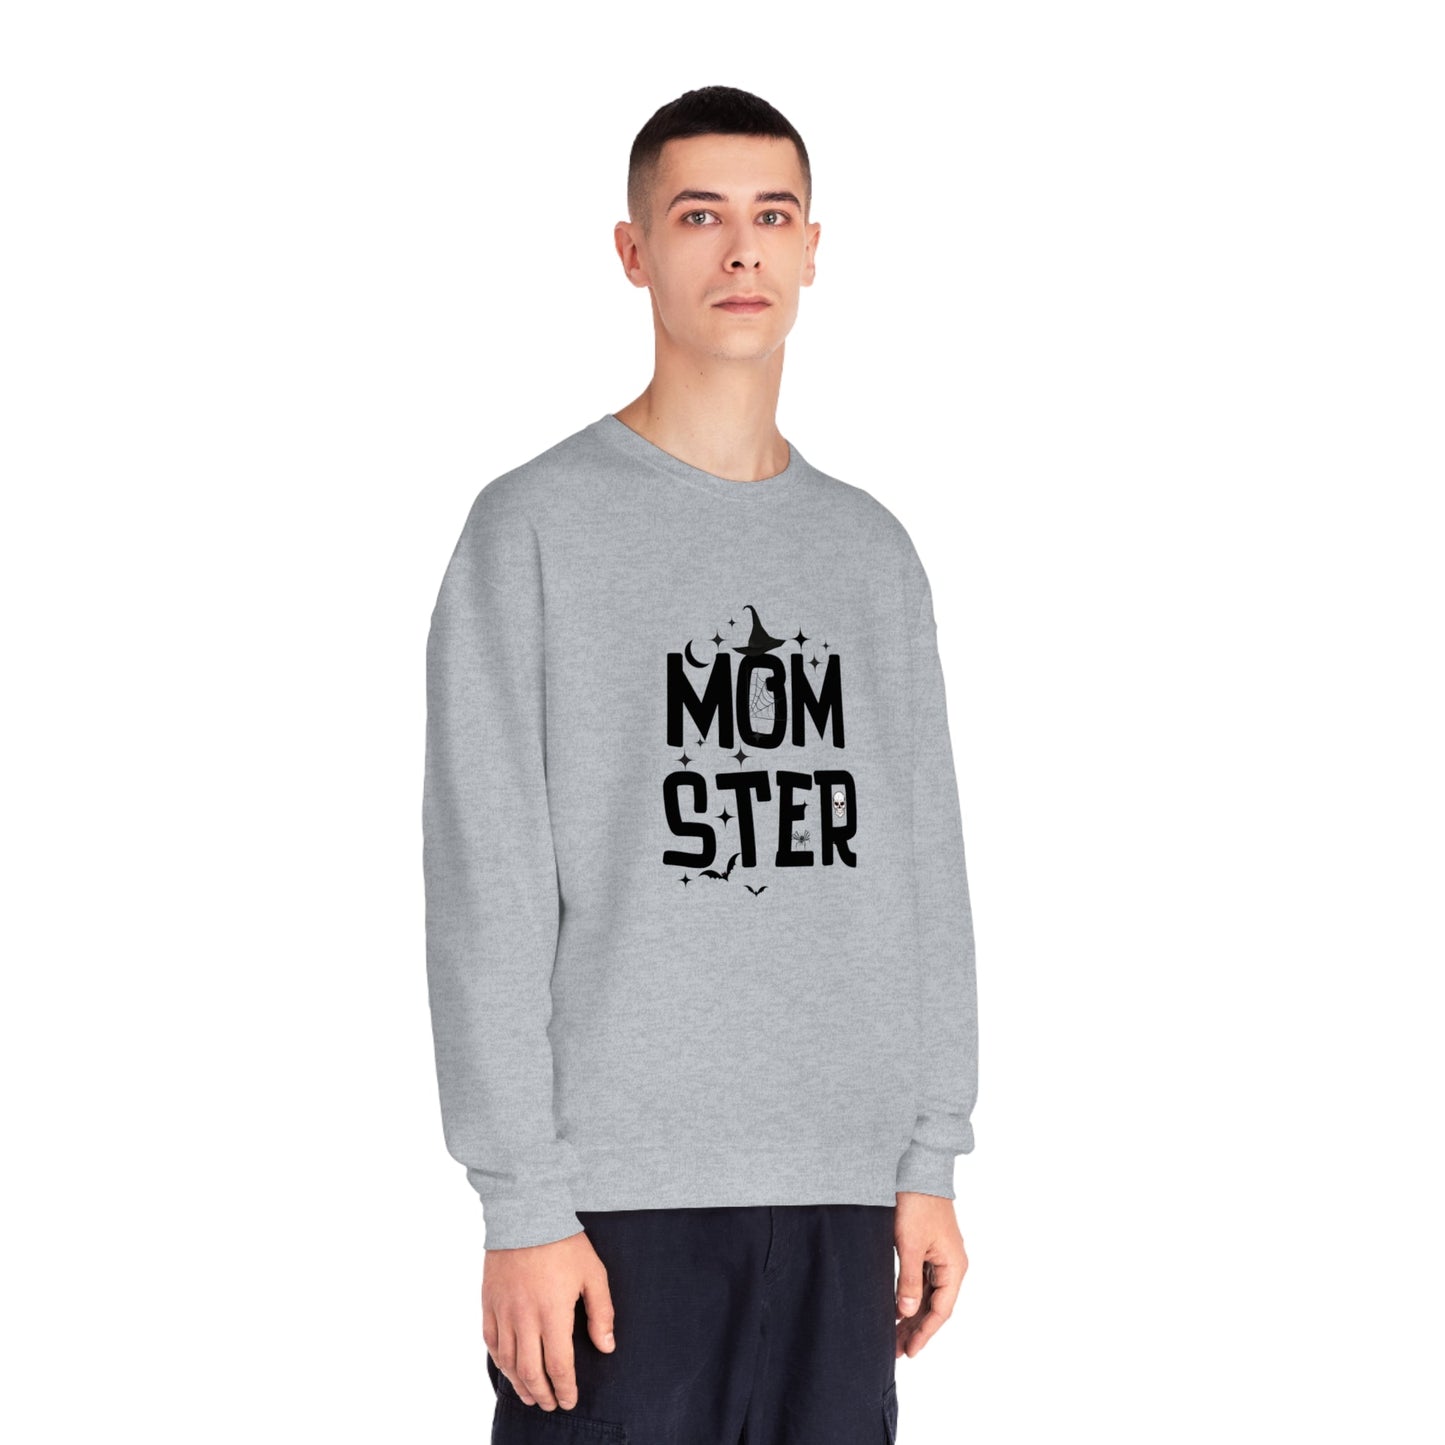 Get trendy with Momster Crewneck Sweatshirt - Sweatshirt available at Good Gift Company. Grab yours for $28 today!